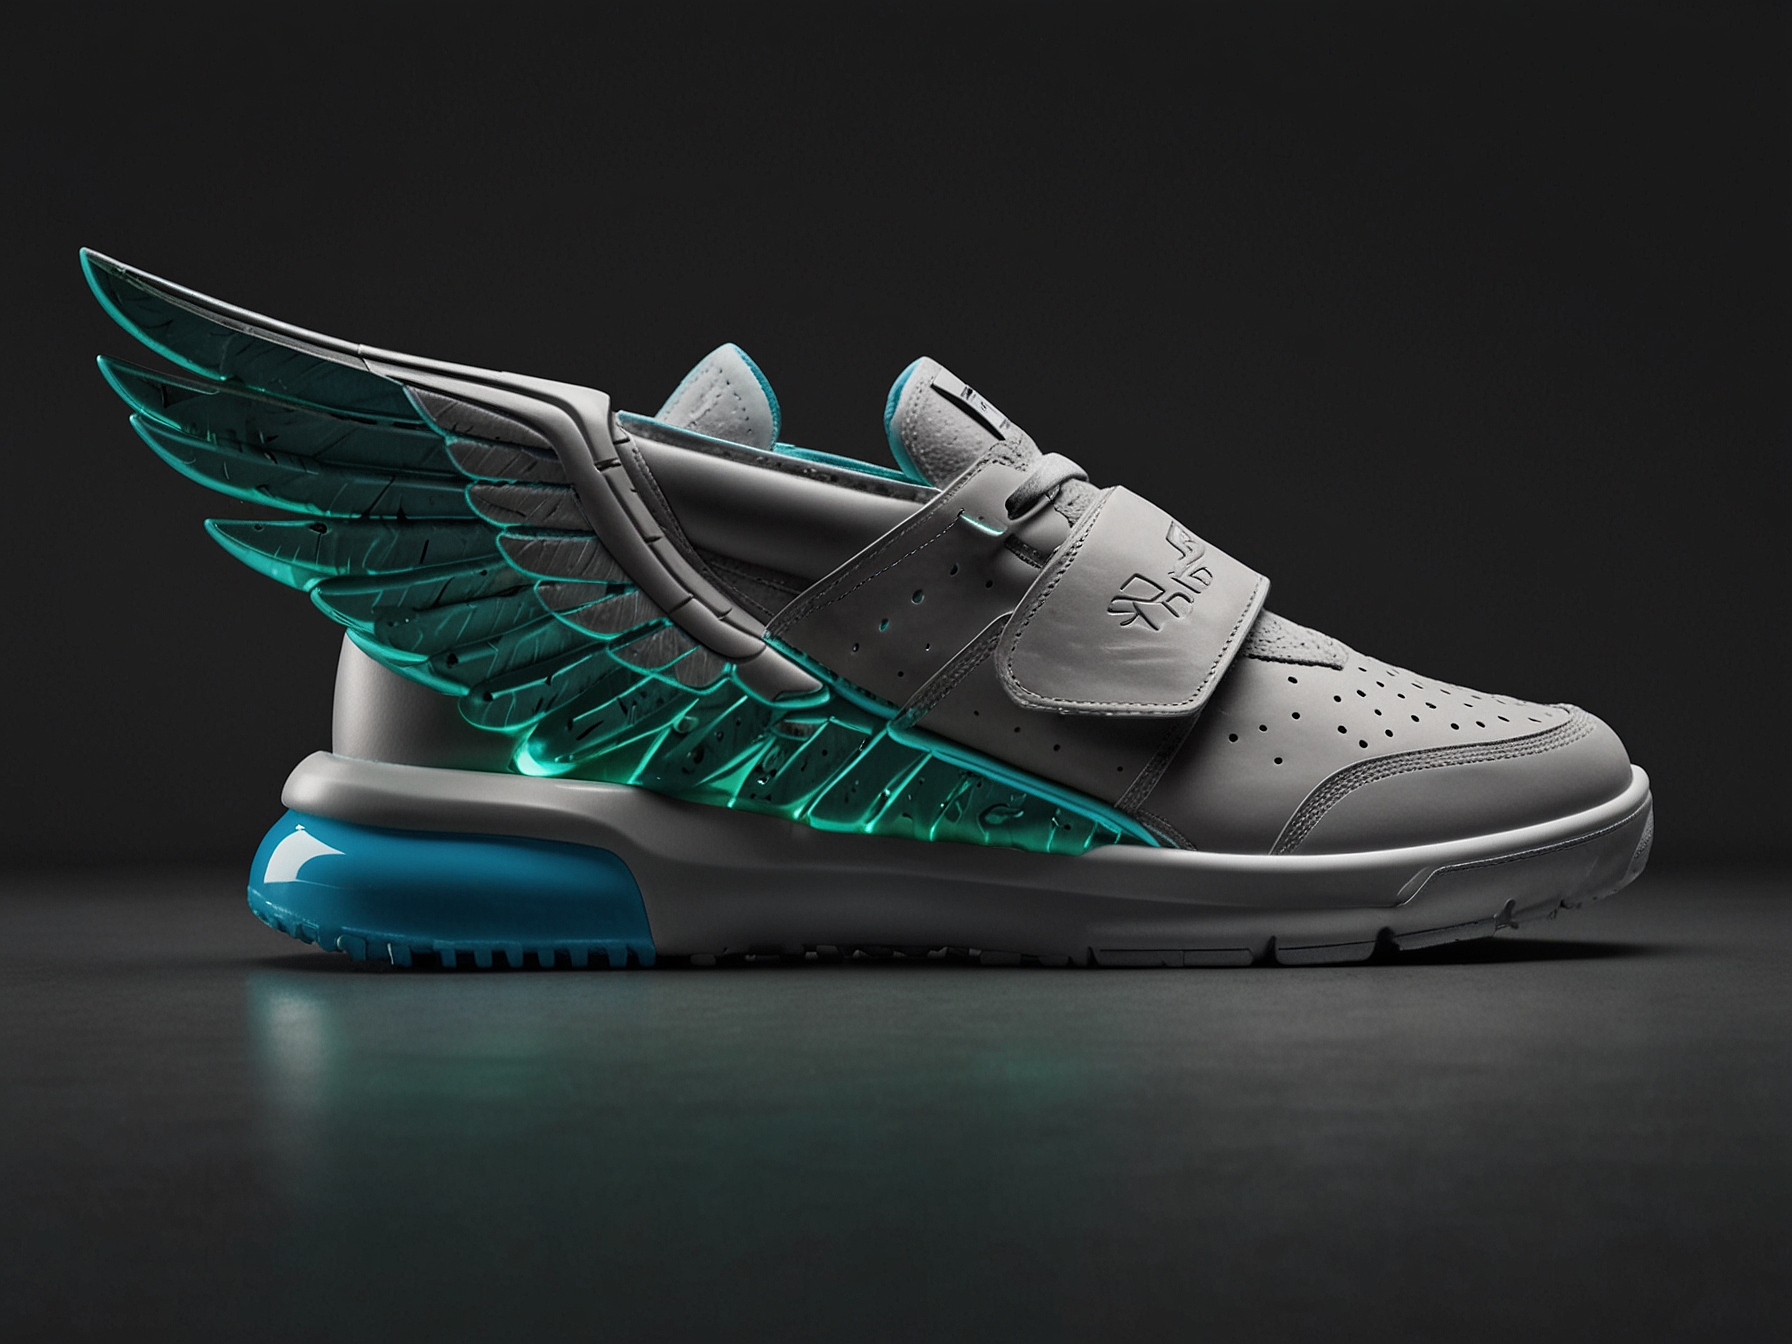 A sleek display of the RX MOC and RX SLIDE sneakers featuring wing-like designs, with the RX MOC in grey and green tones, while the SLIDE features a light blue scheme, reflecting elegance and calmness.